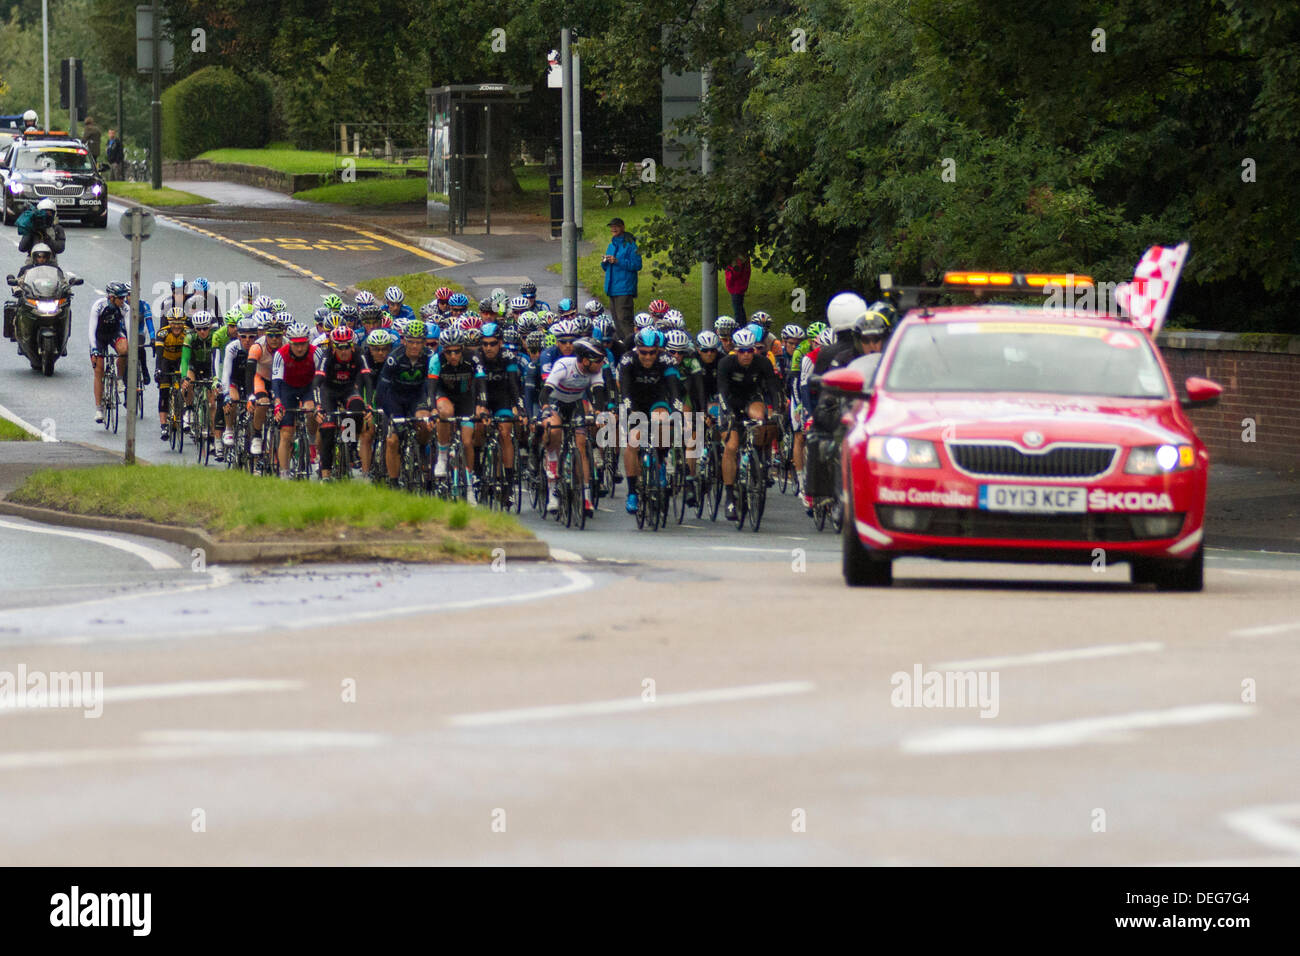 Stoke on Trent, Staffordshire, UK. 18th Sep, 2013. Cyclists pass through the Trentham area of Stoke on Trent, Staffordshire on stage 4 of the Tour of Britain, starting in Stoke on Trent and finishing in Llanberis in Wales Credit: © Alex Williams/Alamy Live News  Stock Photo